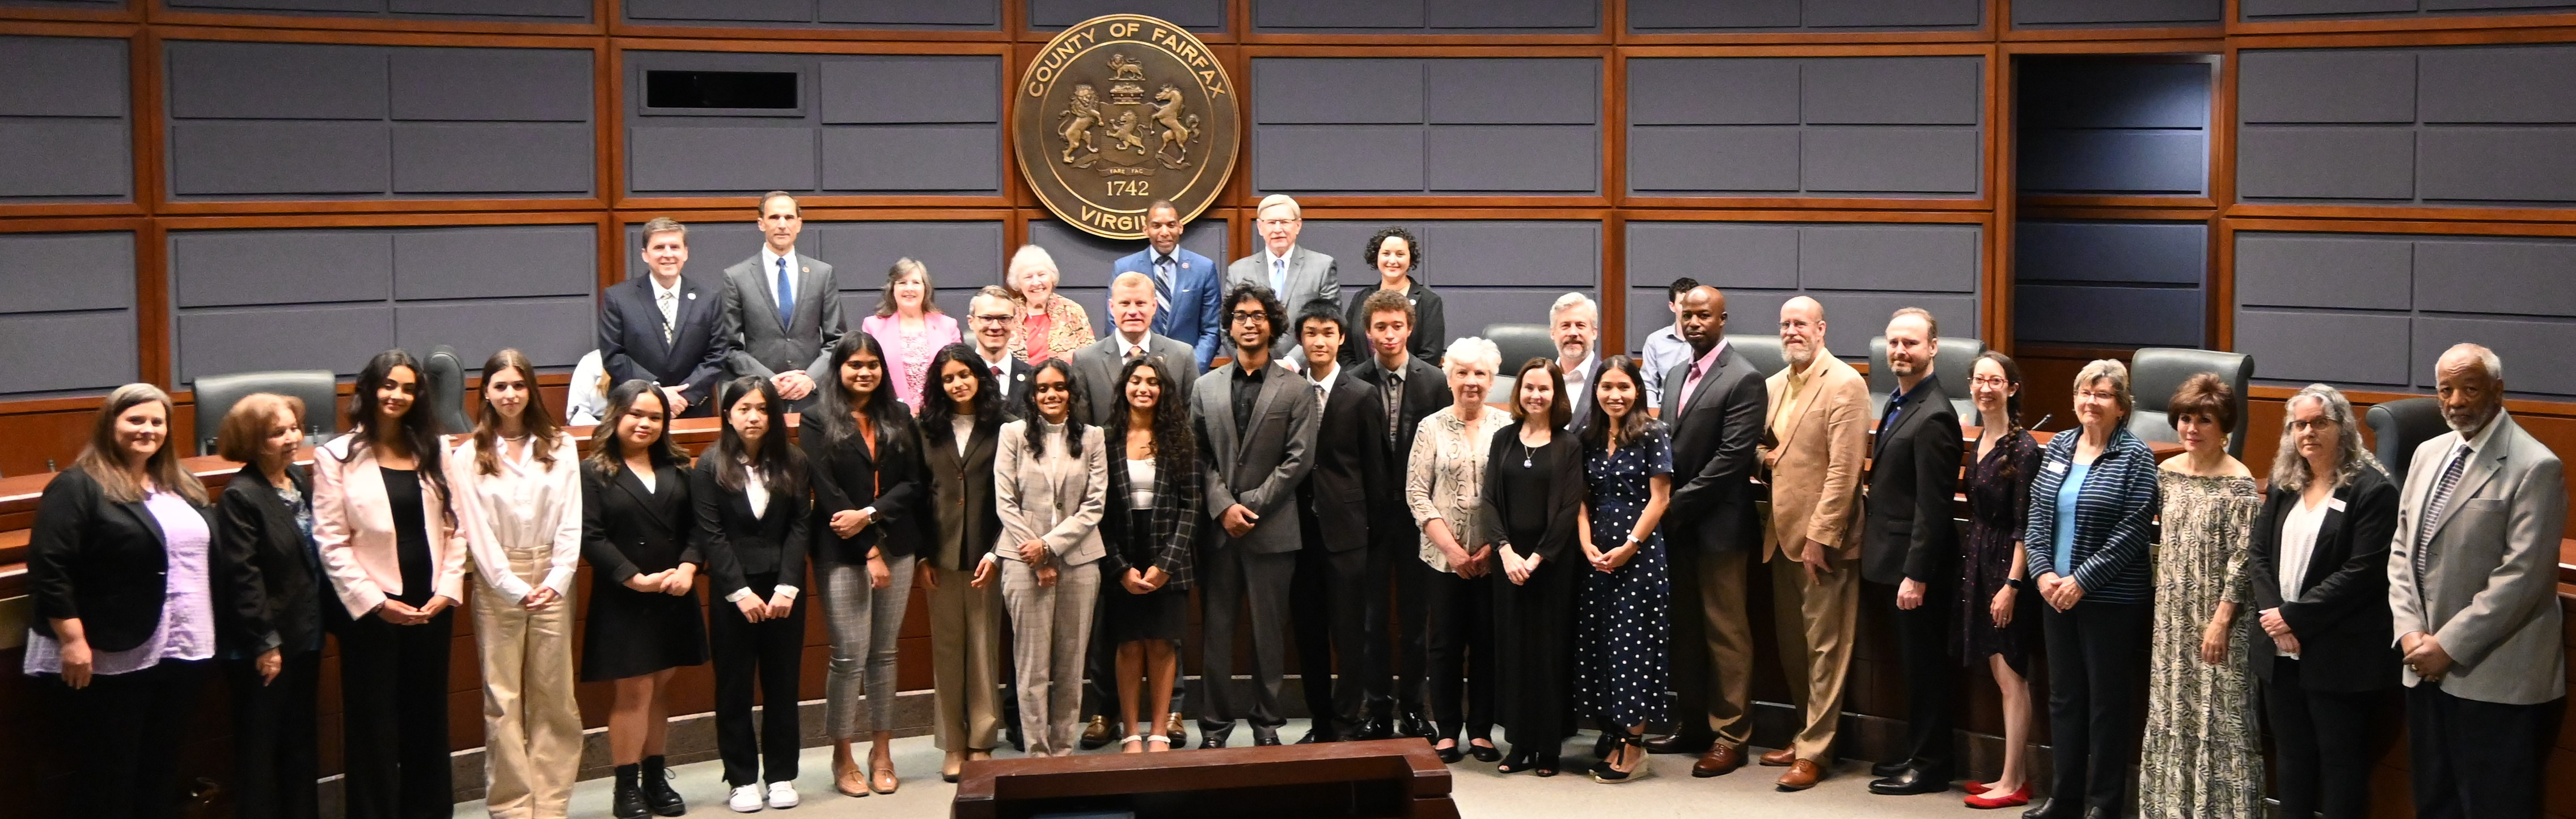 Fairfax County Board of Supervisors and members of the Fairfax Area Commission on Aging recognize winners of Fairfax Area Student "Shark Tank" Challenge 